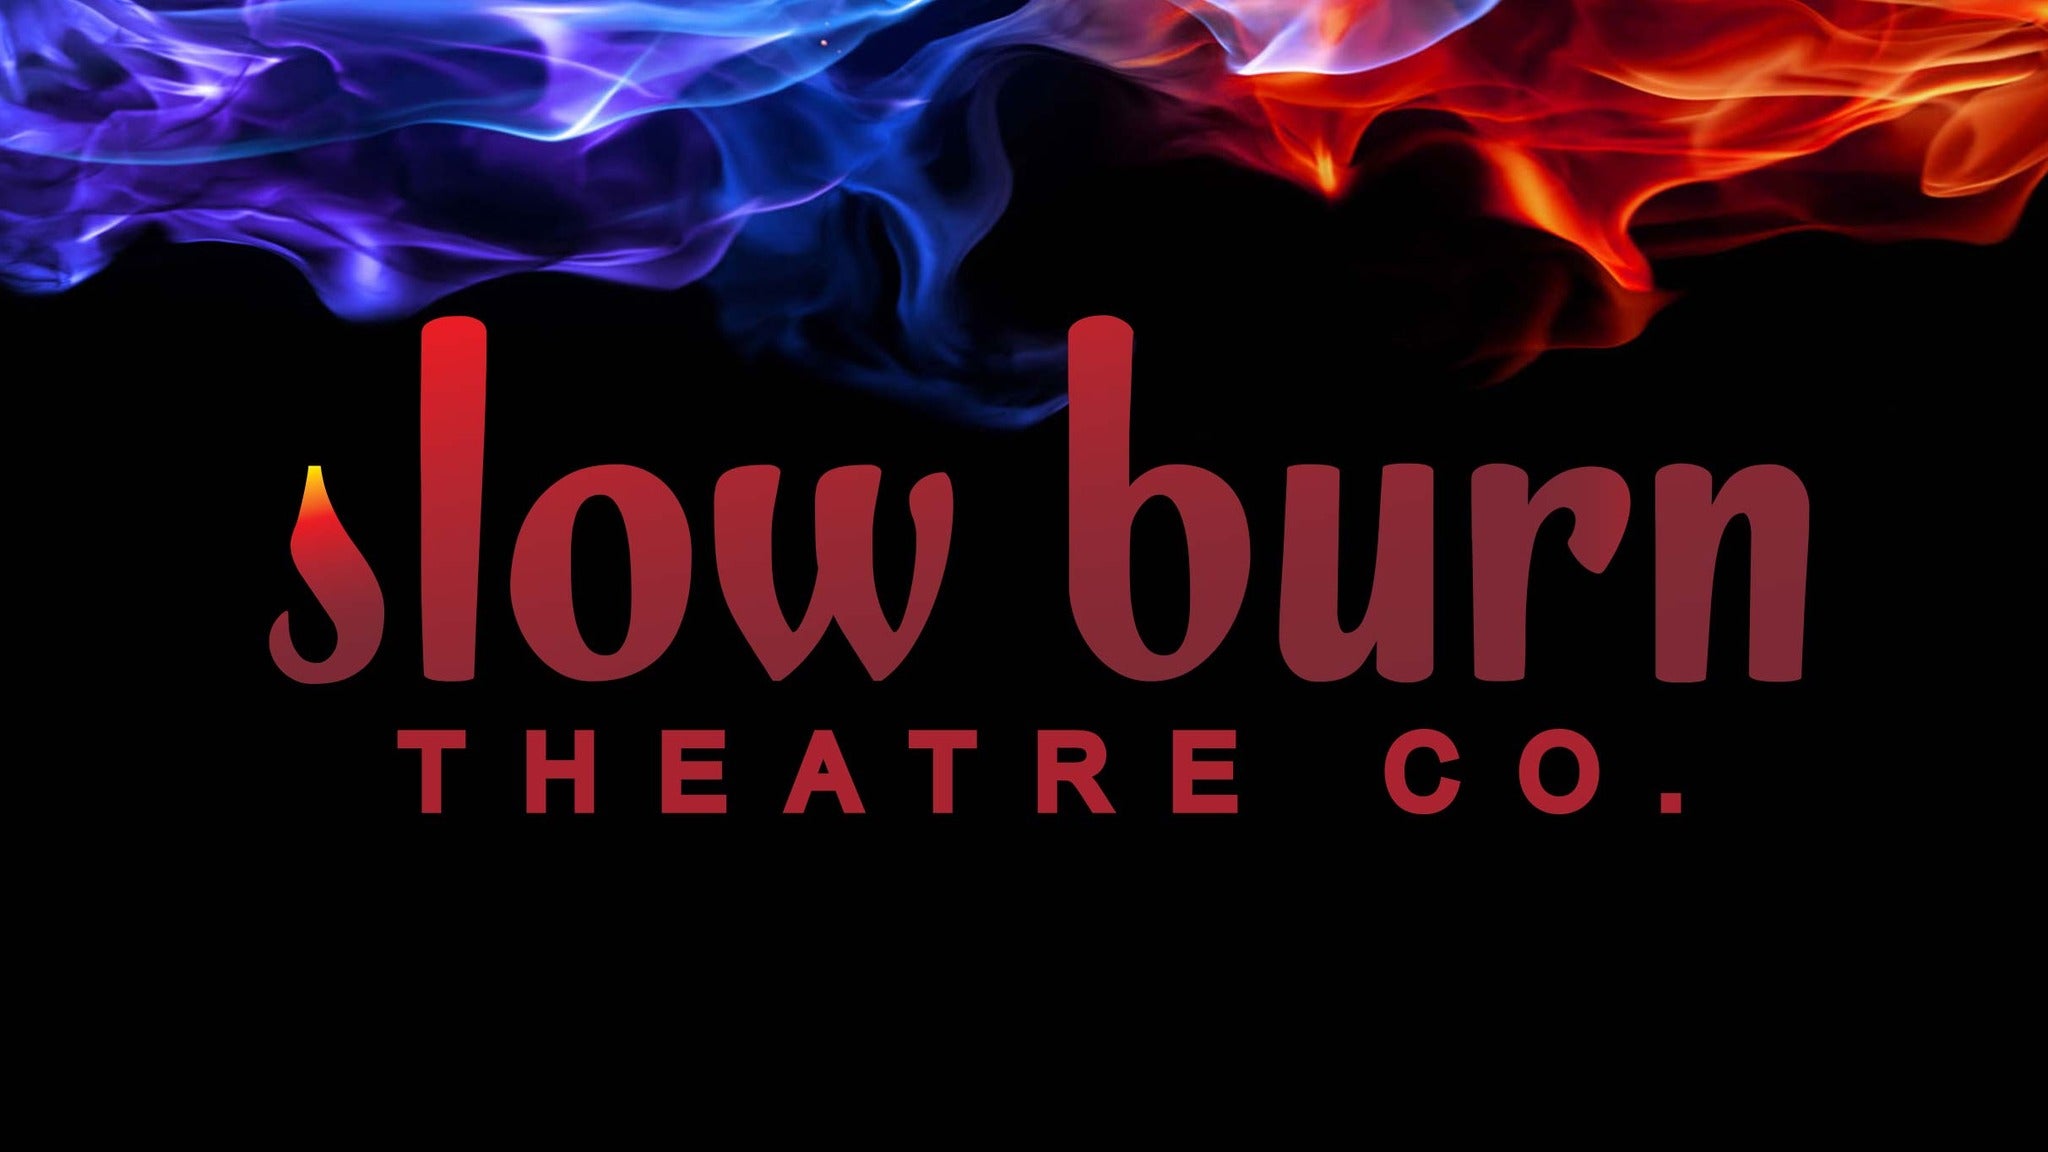 Slow Burn Theatre Co: The Bridges of Madison County in Ft Lauderdale promo photo for Special Broward Center presale offer code